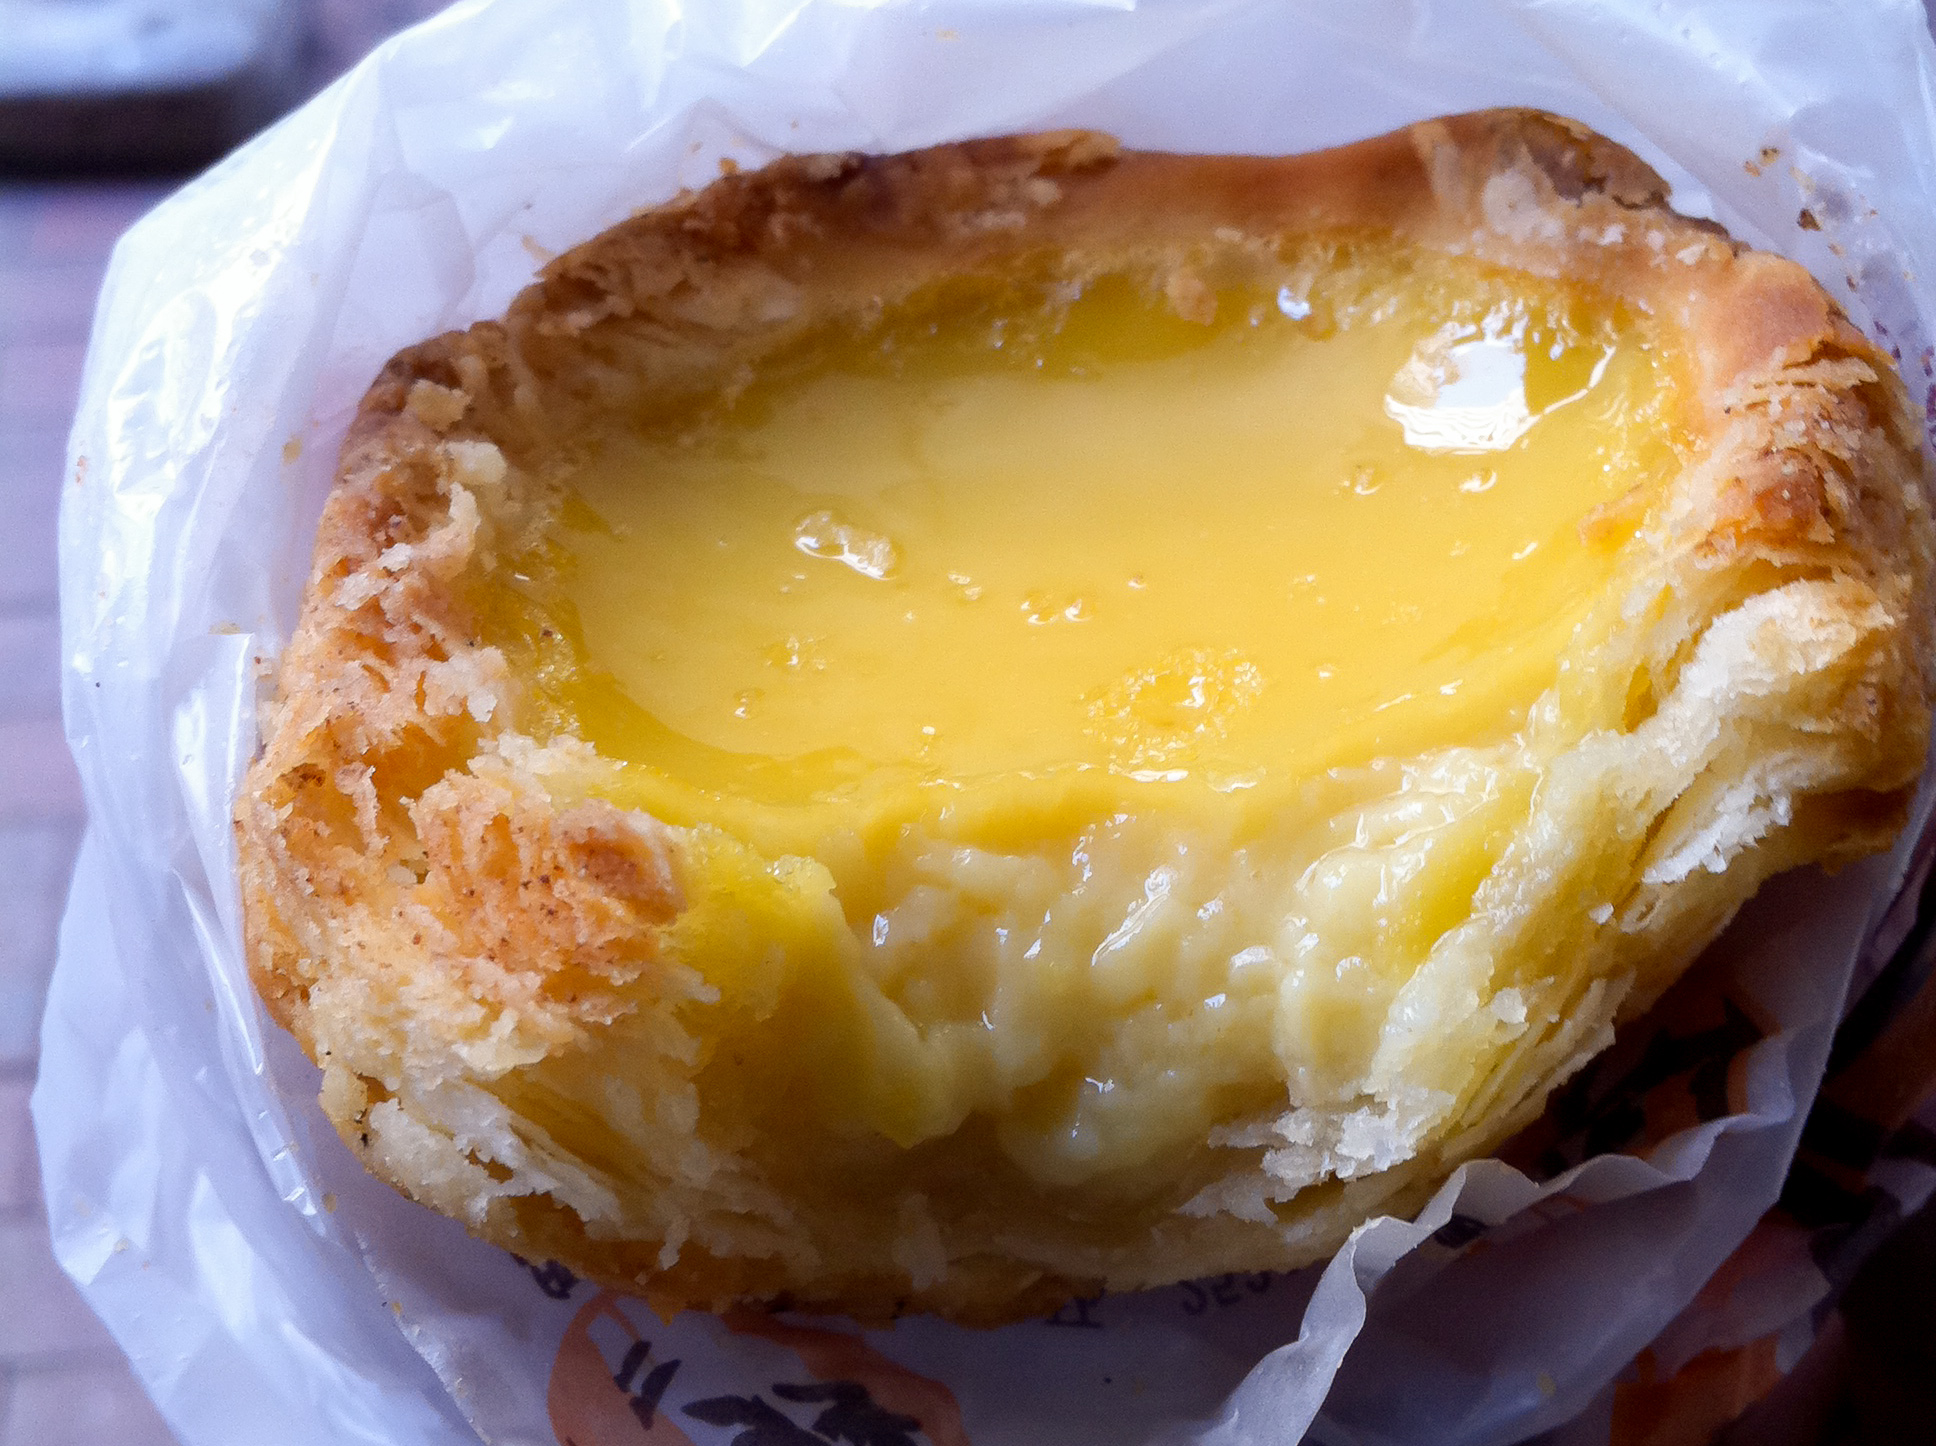 Egg tart at Honolulu Coffee Shop in Hong Kong. Photo by alphacityguides.